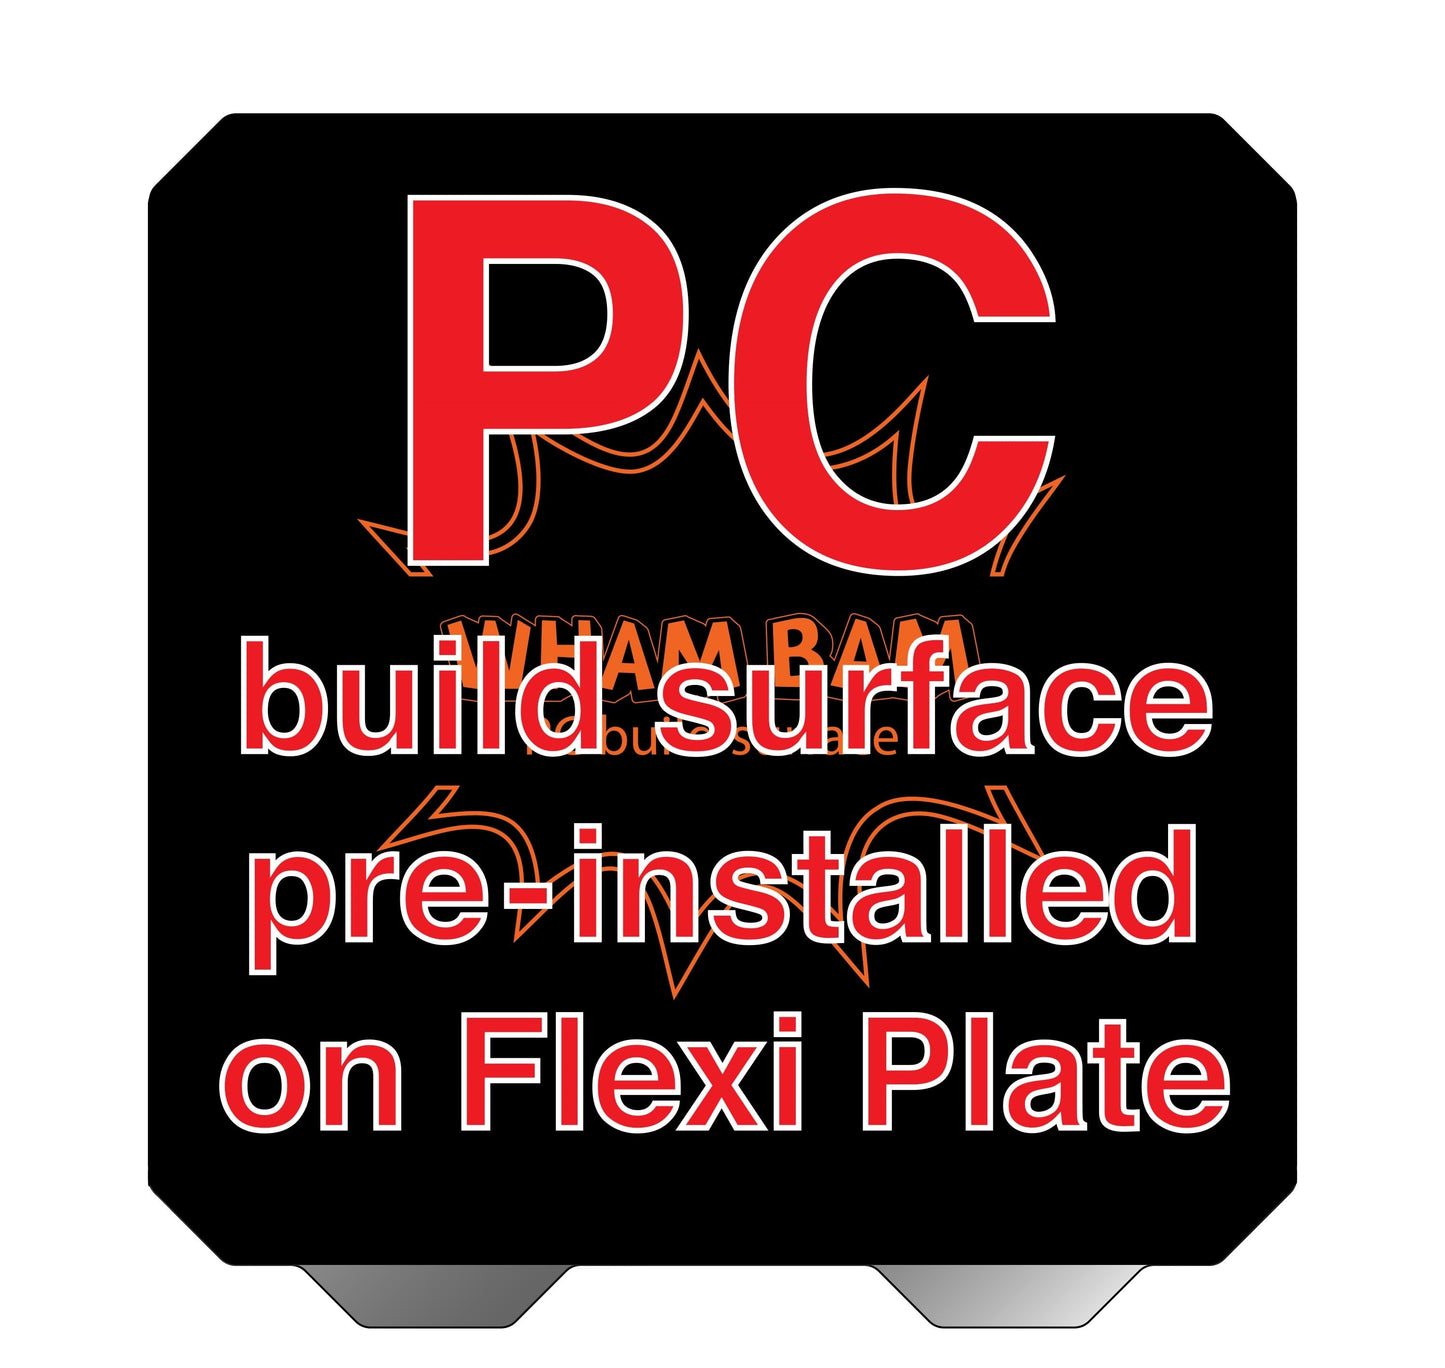 Flexi Plate with Pre-Installed PC Build Surface (Classic Black) - 220 x 220 - Anet A8,  Monoprice Maker Select Plus, Robo R2